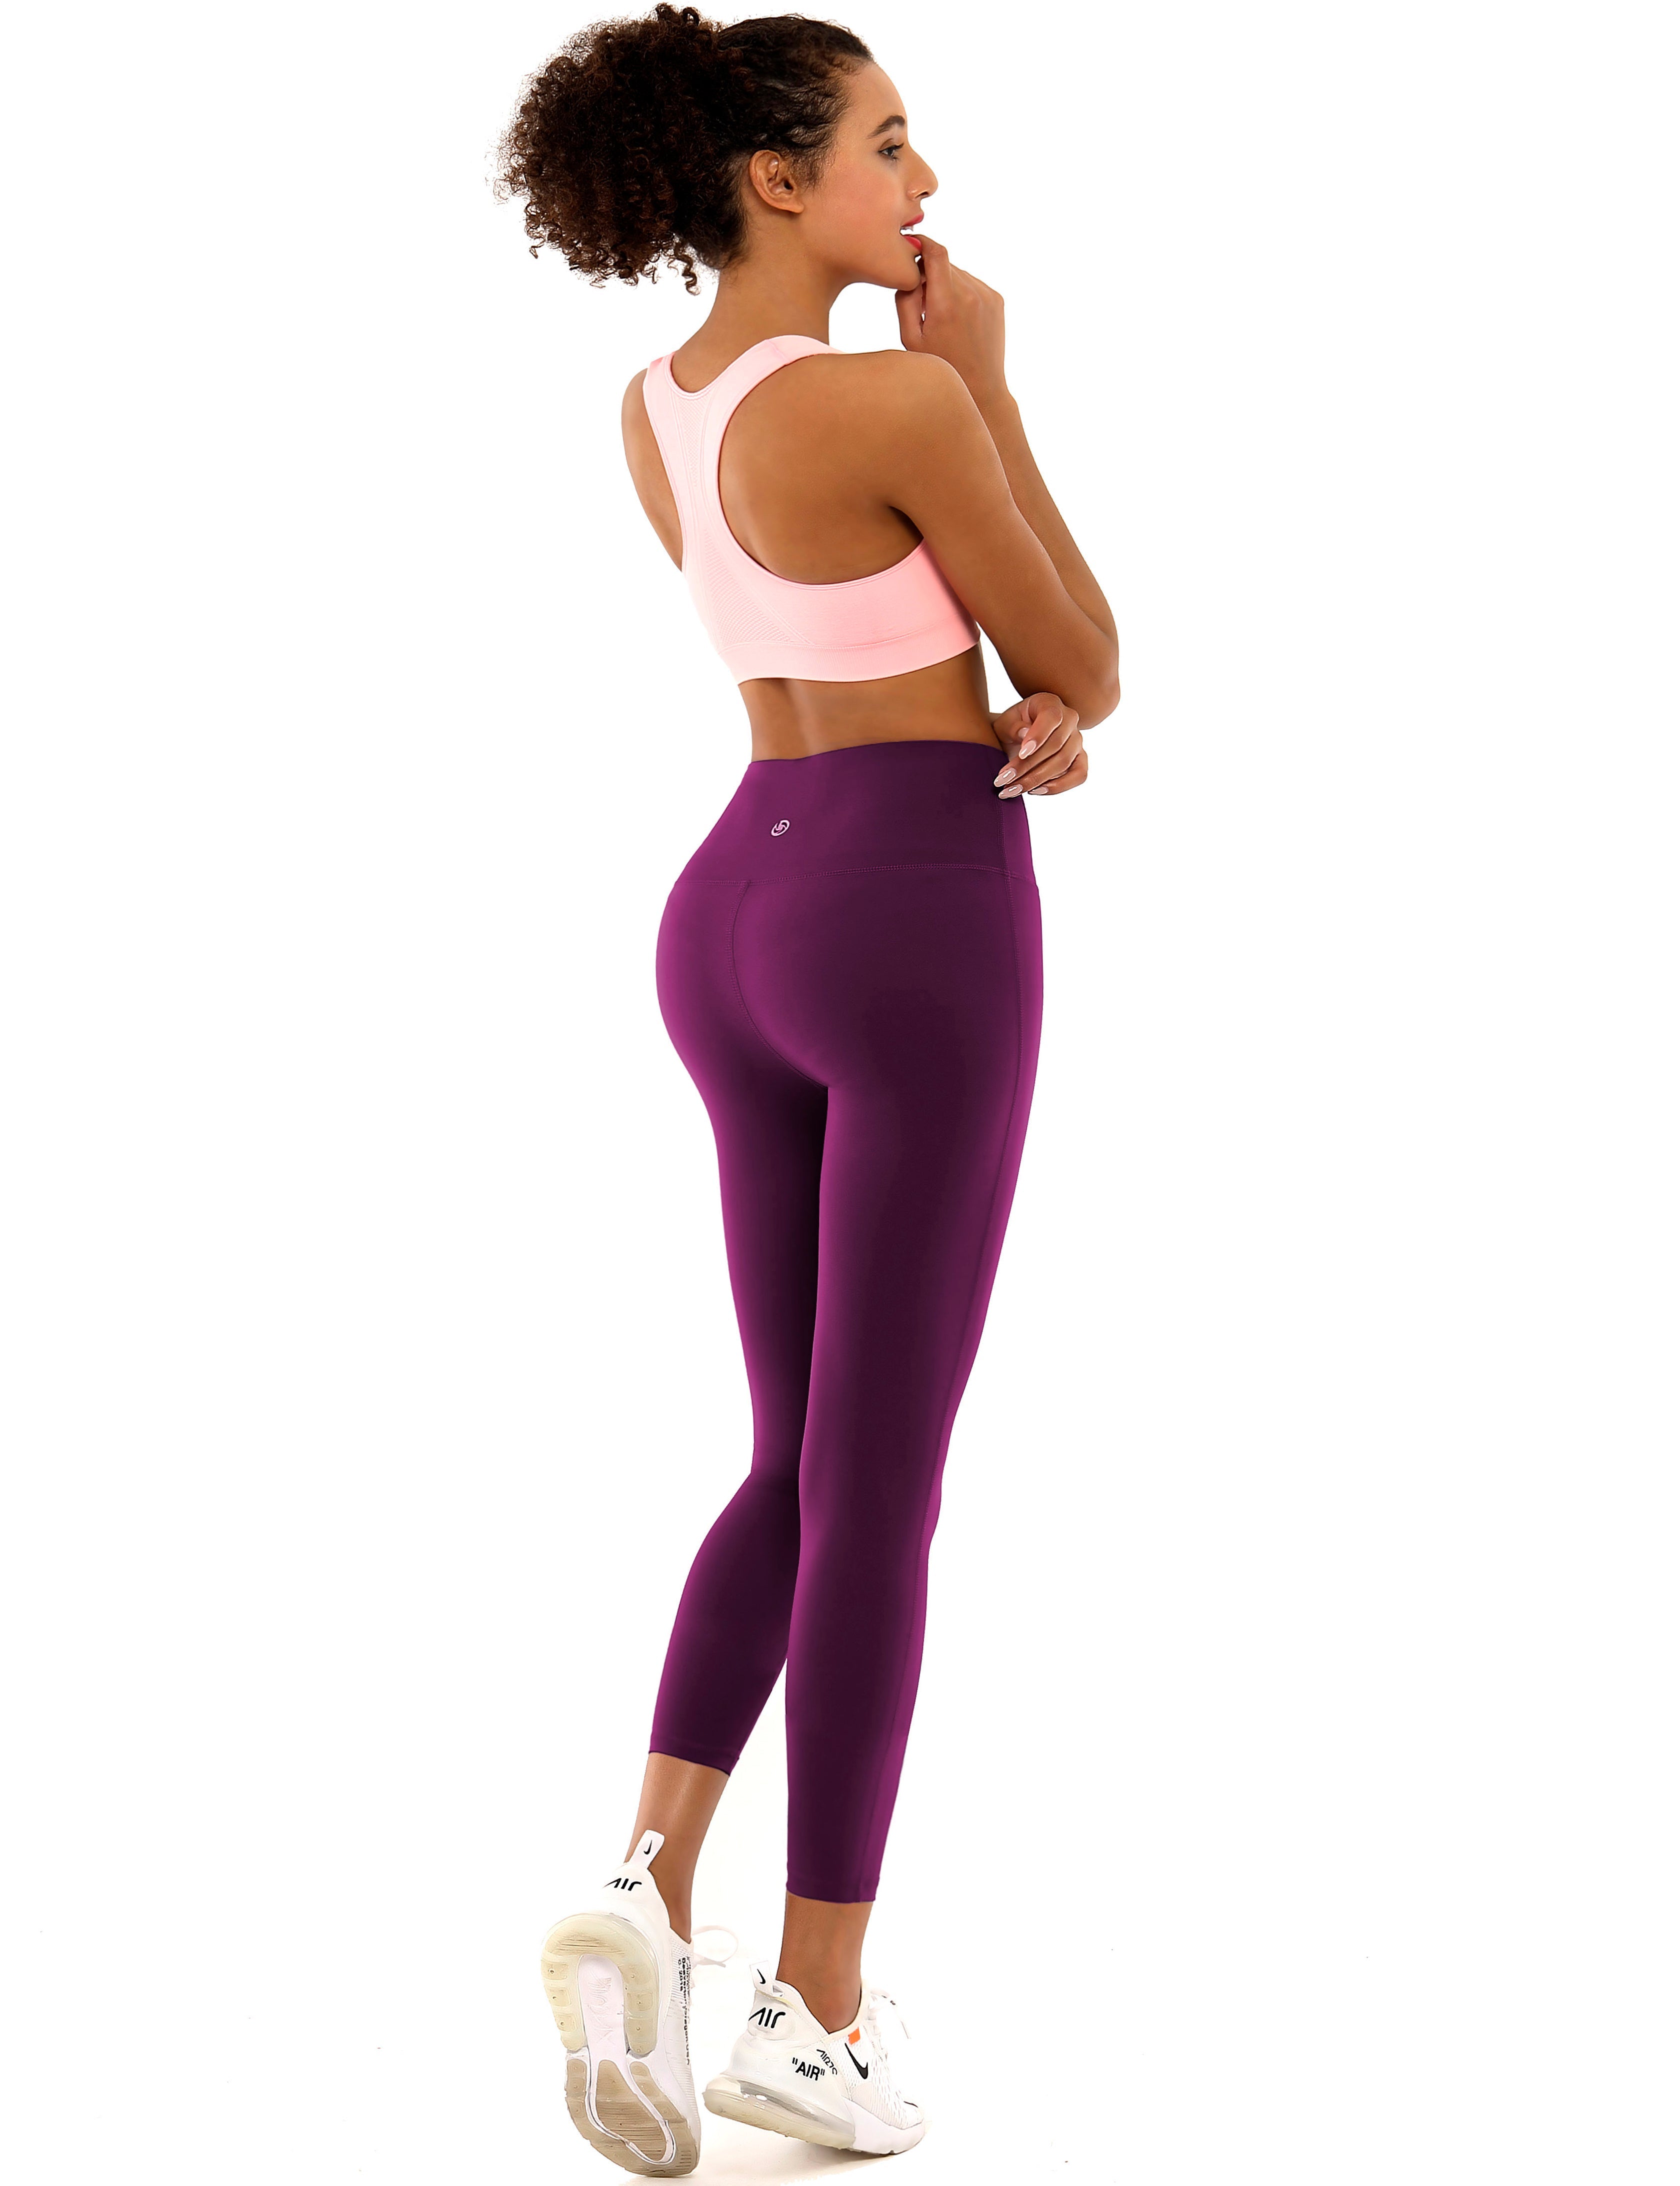 22" High Waist Side Line Capris grapevine 75%Nylon/25%Spandex Fabric doesn't attract lint easily 4-way stretch No see-through Moisture-wicking Tummy control Inner pocket